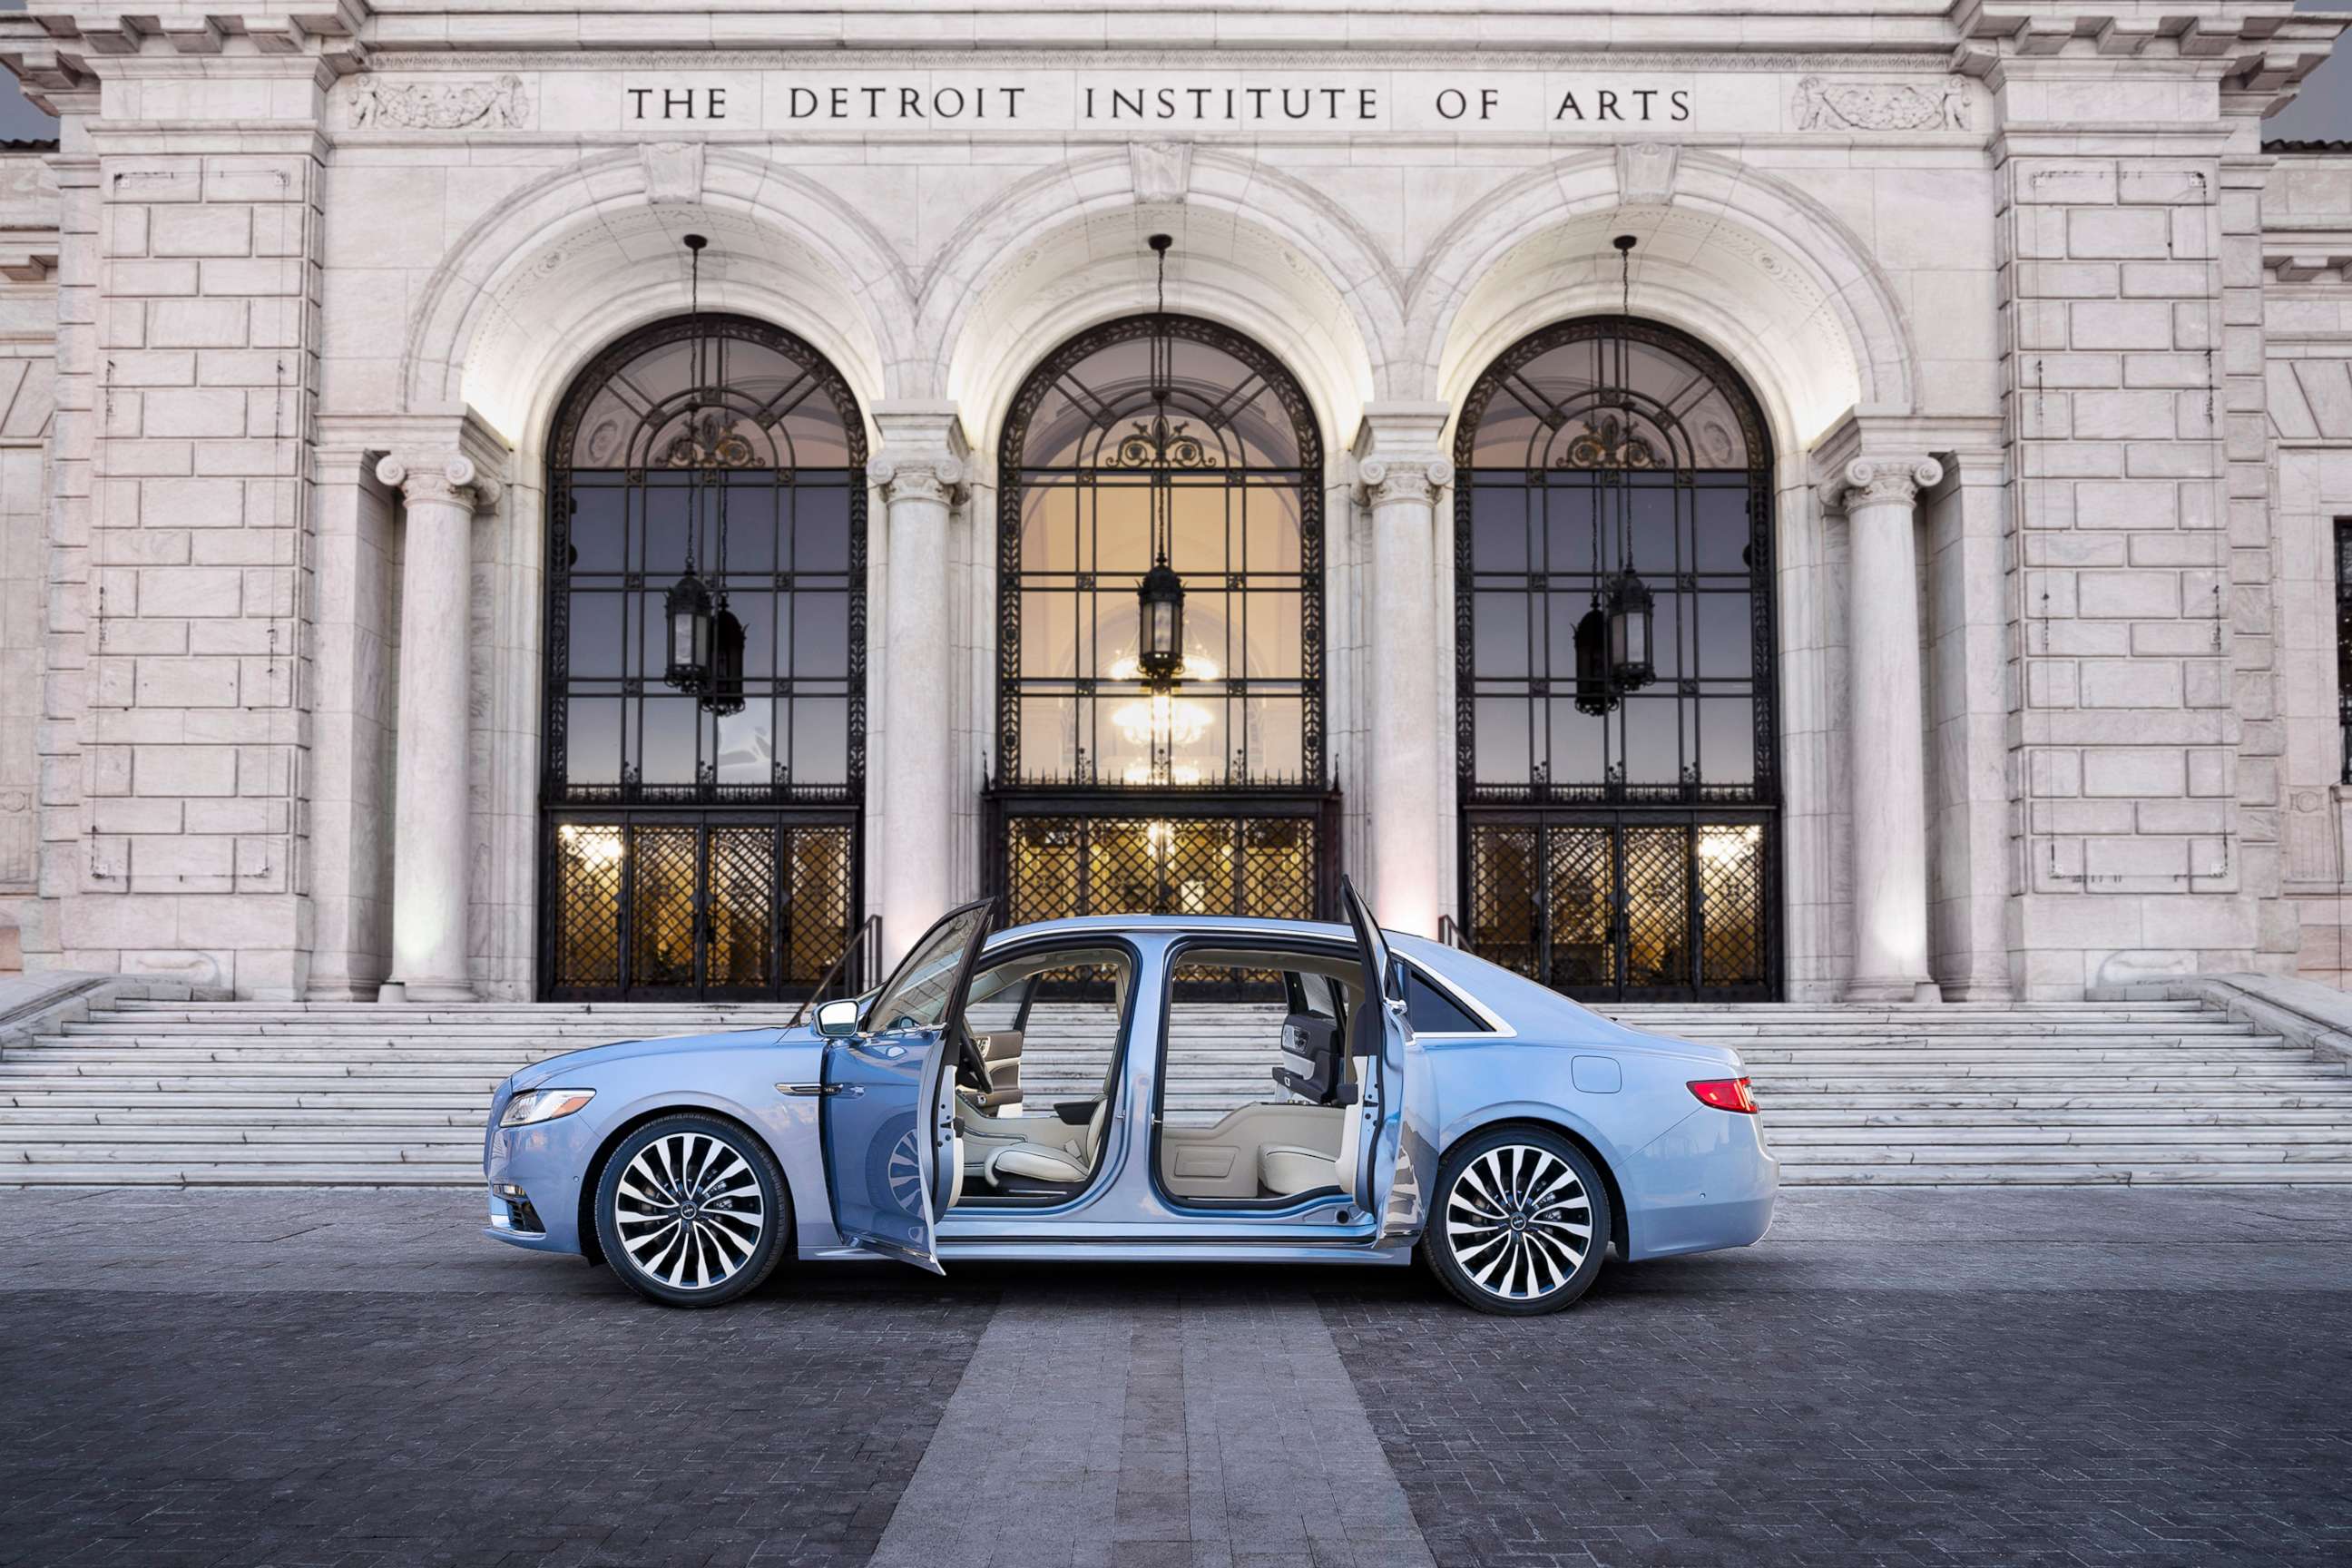 PHOTO: Lincoln has sold all 80 units of its special edition Continentals, which come with coach doors.